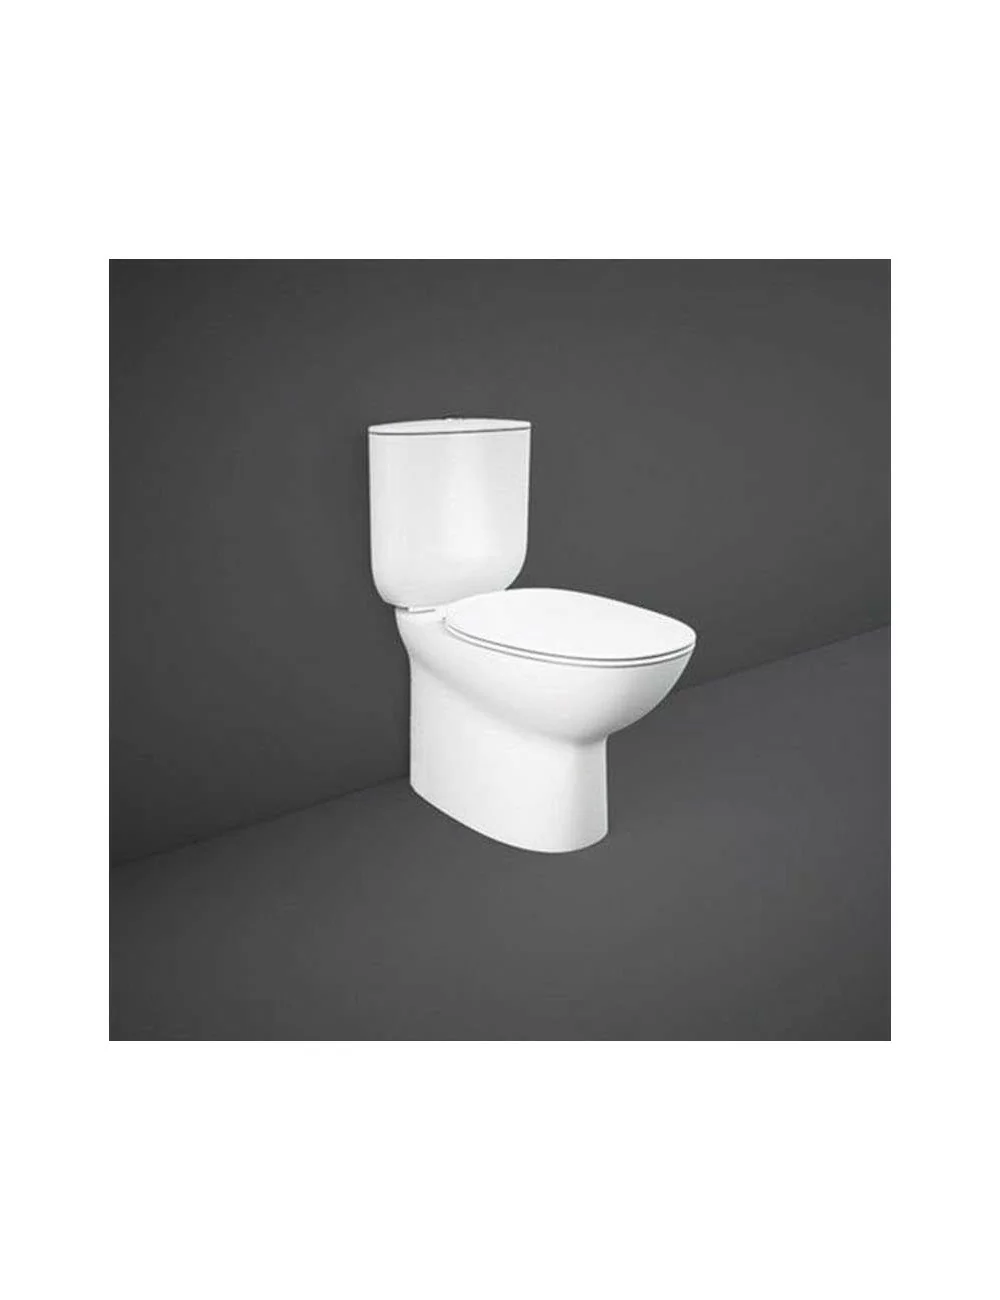 Toilet monobloc and flush Morning collection